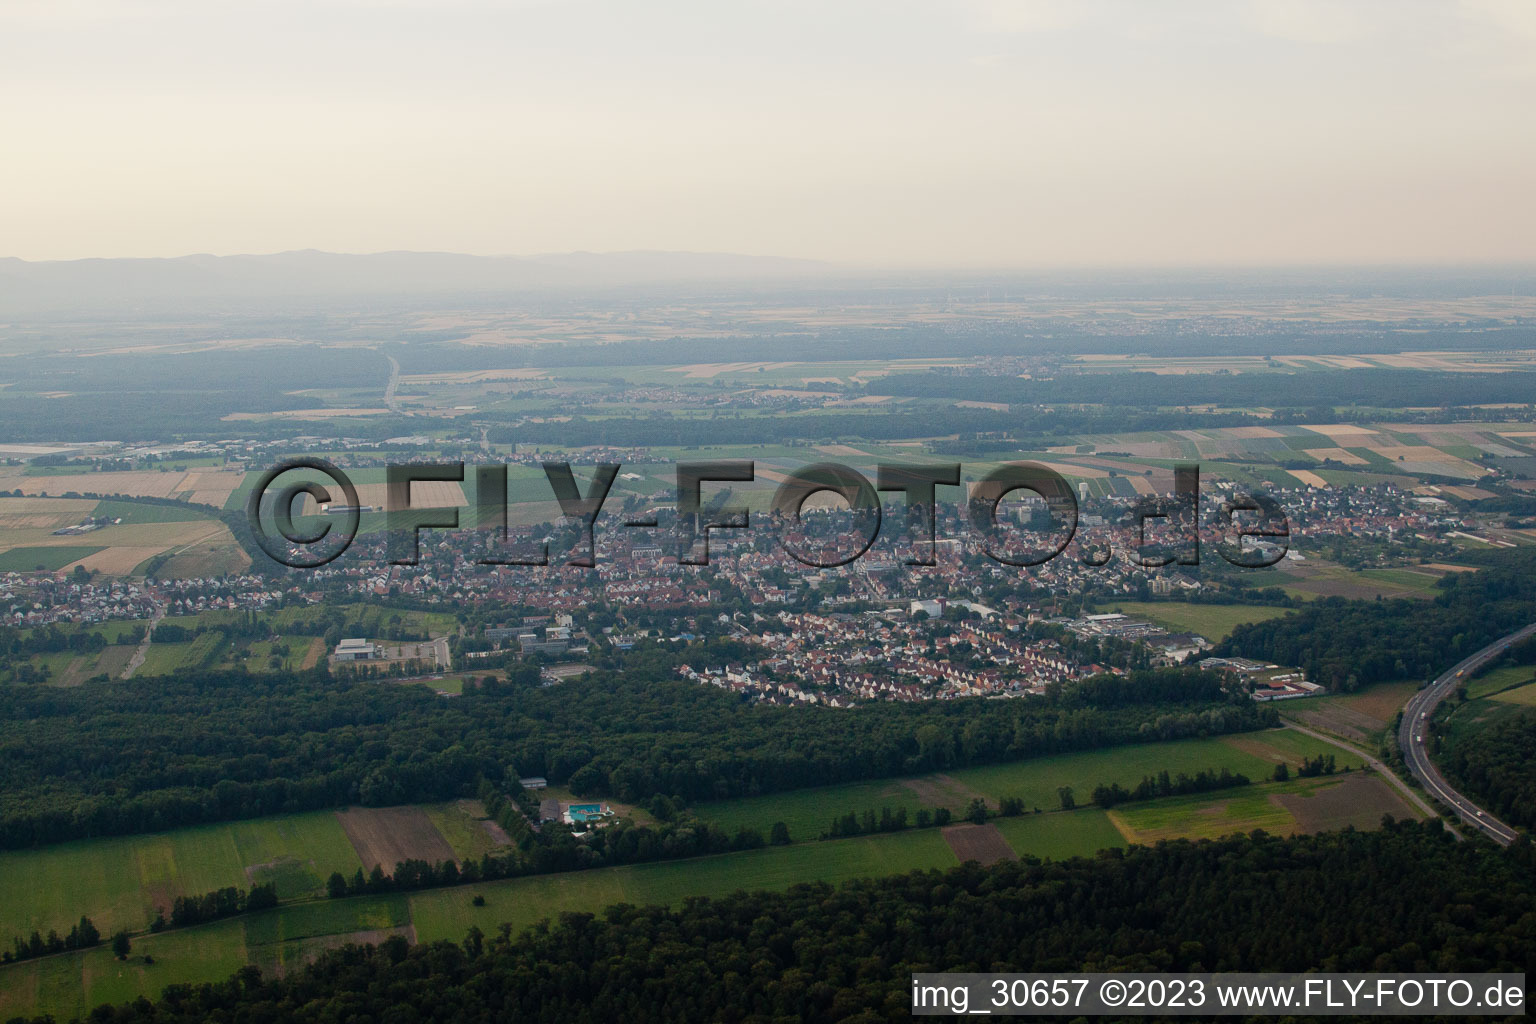 From the southeast in Kandel in the state Rhineland-Palatinate, Germany seen from above